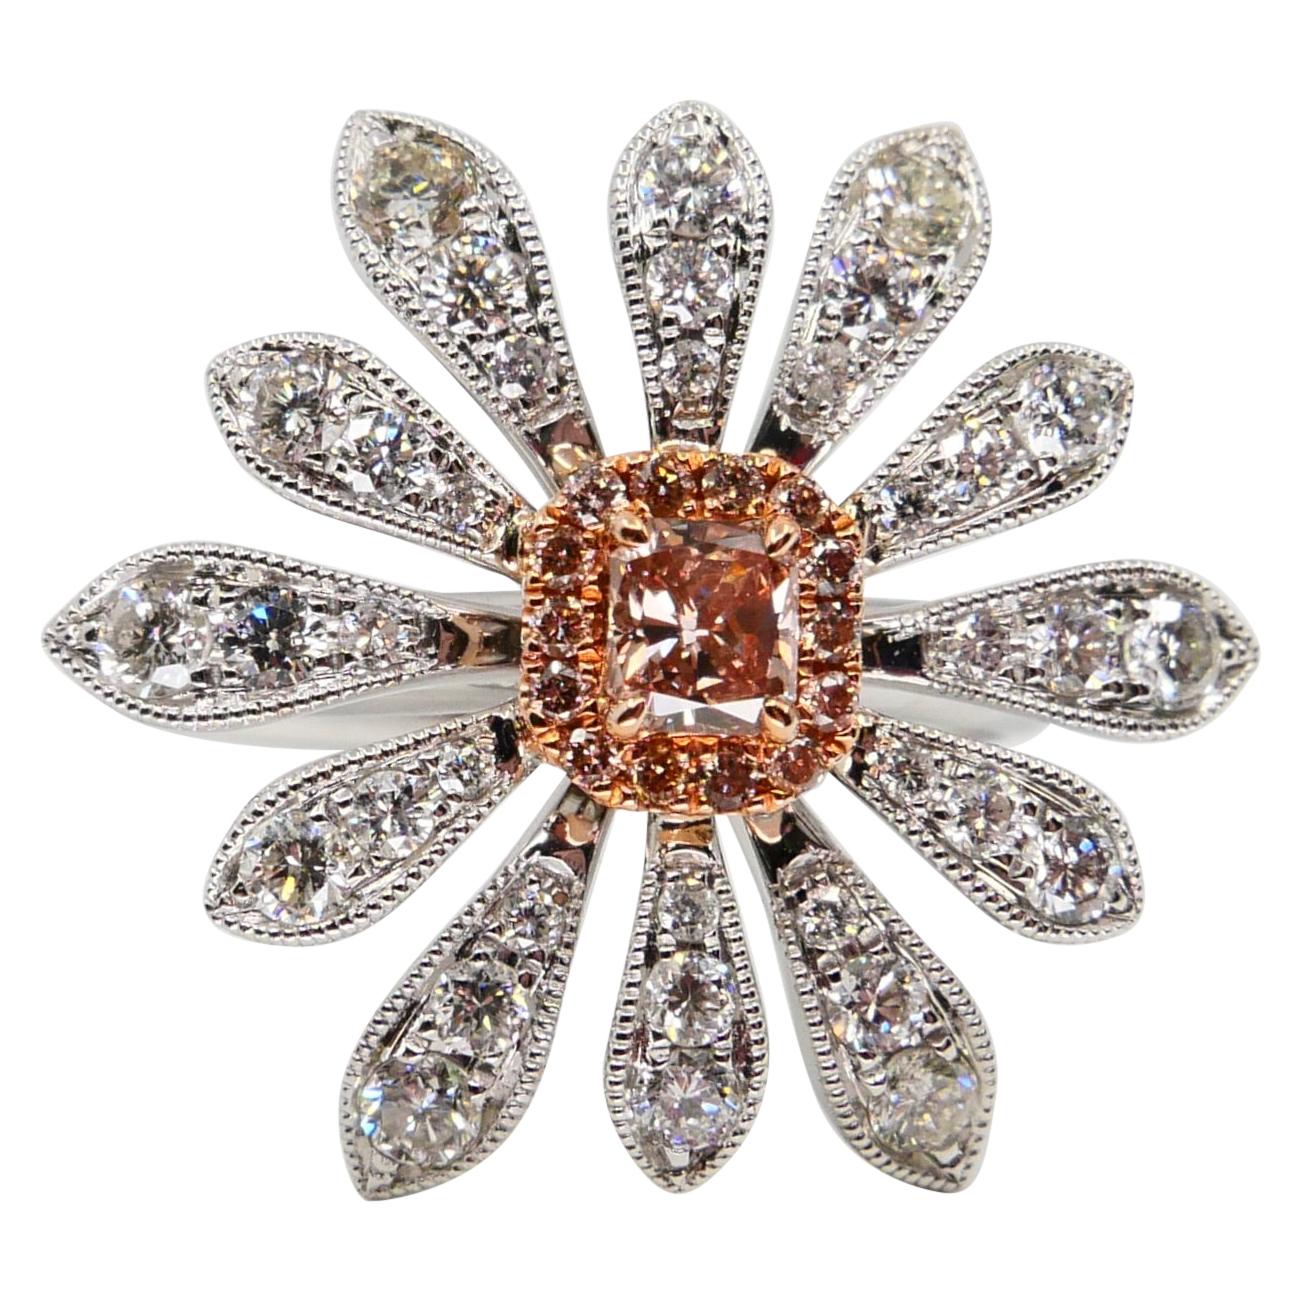 0.26 Carat Natural Fancy Pink Diamond and White Diamond Flower Cocktail Ring